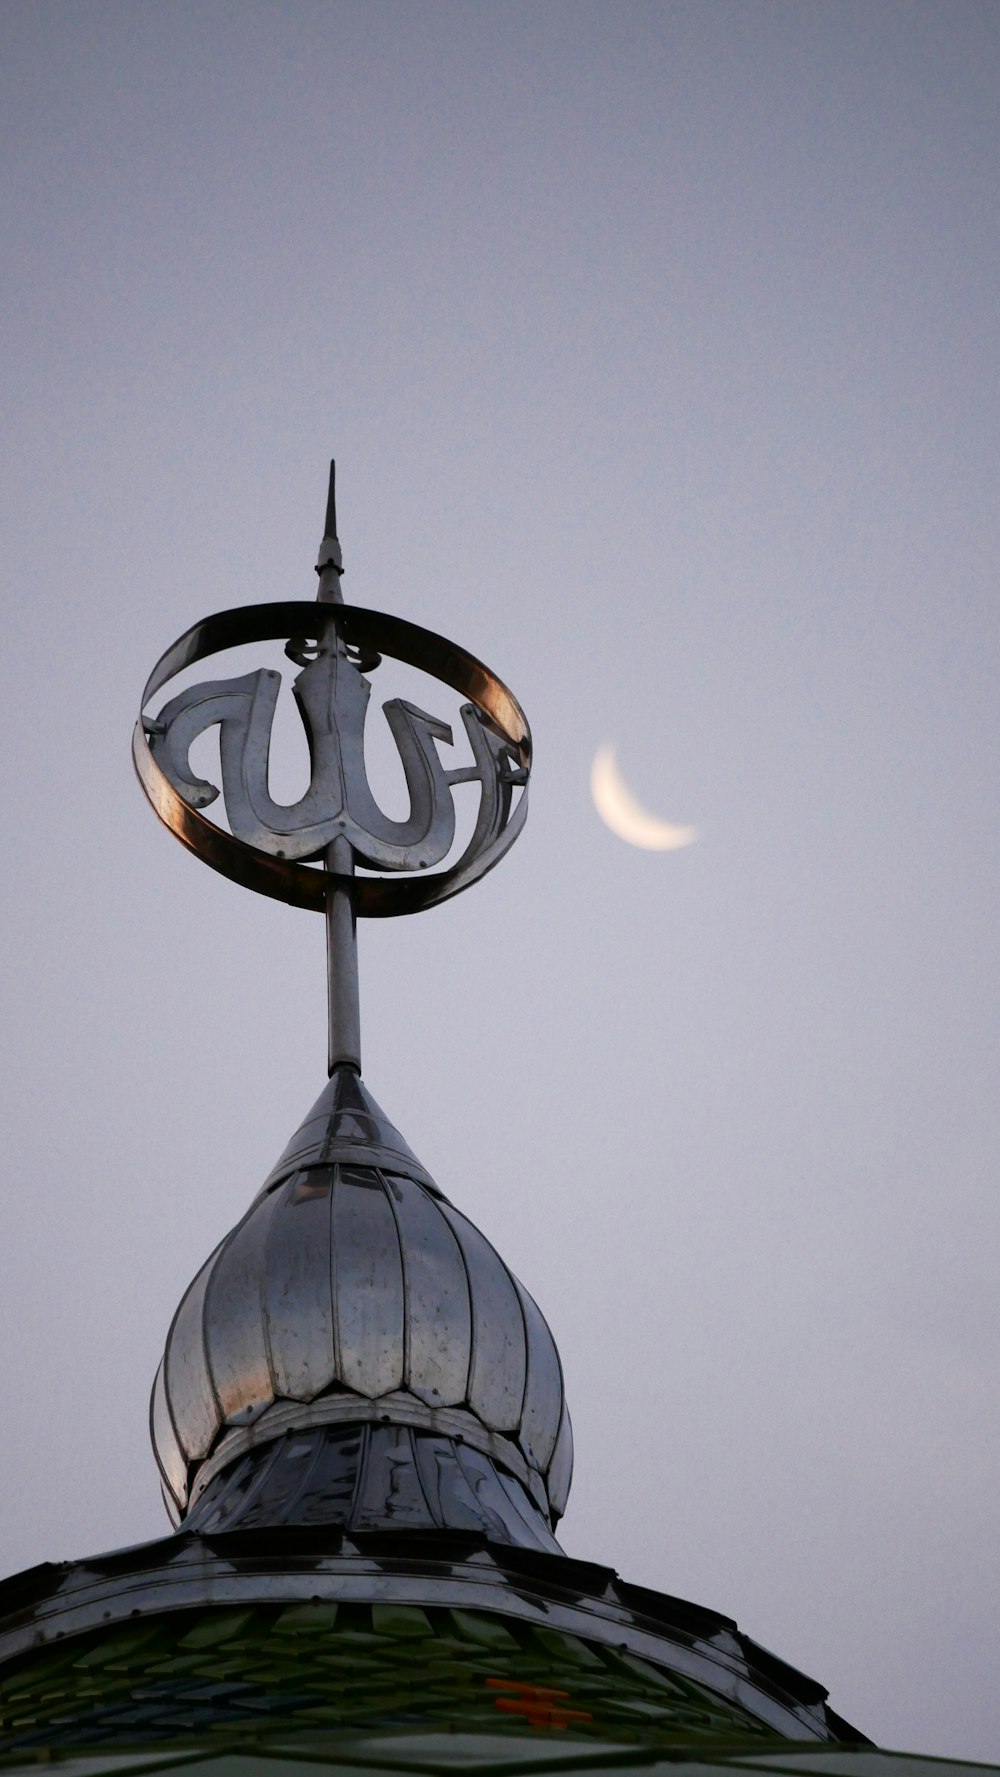 a clock on top of a building with the moon in the background